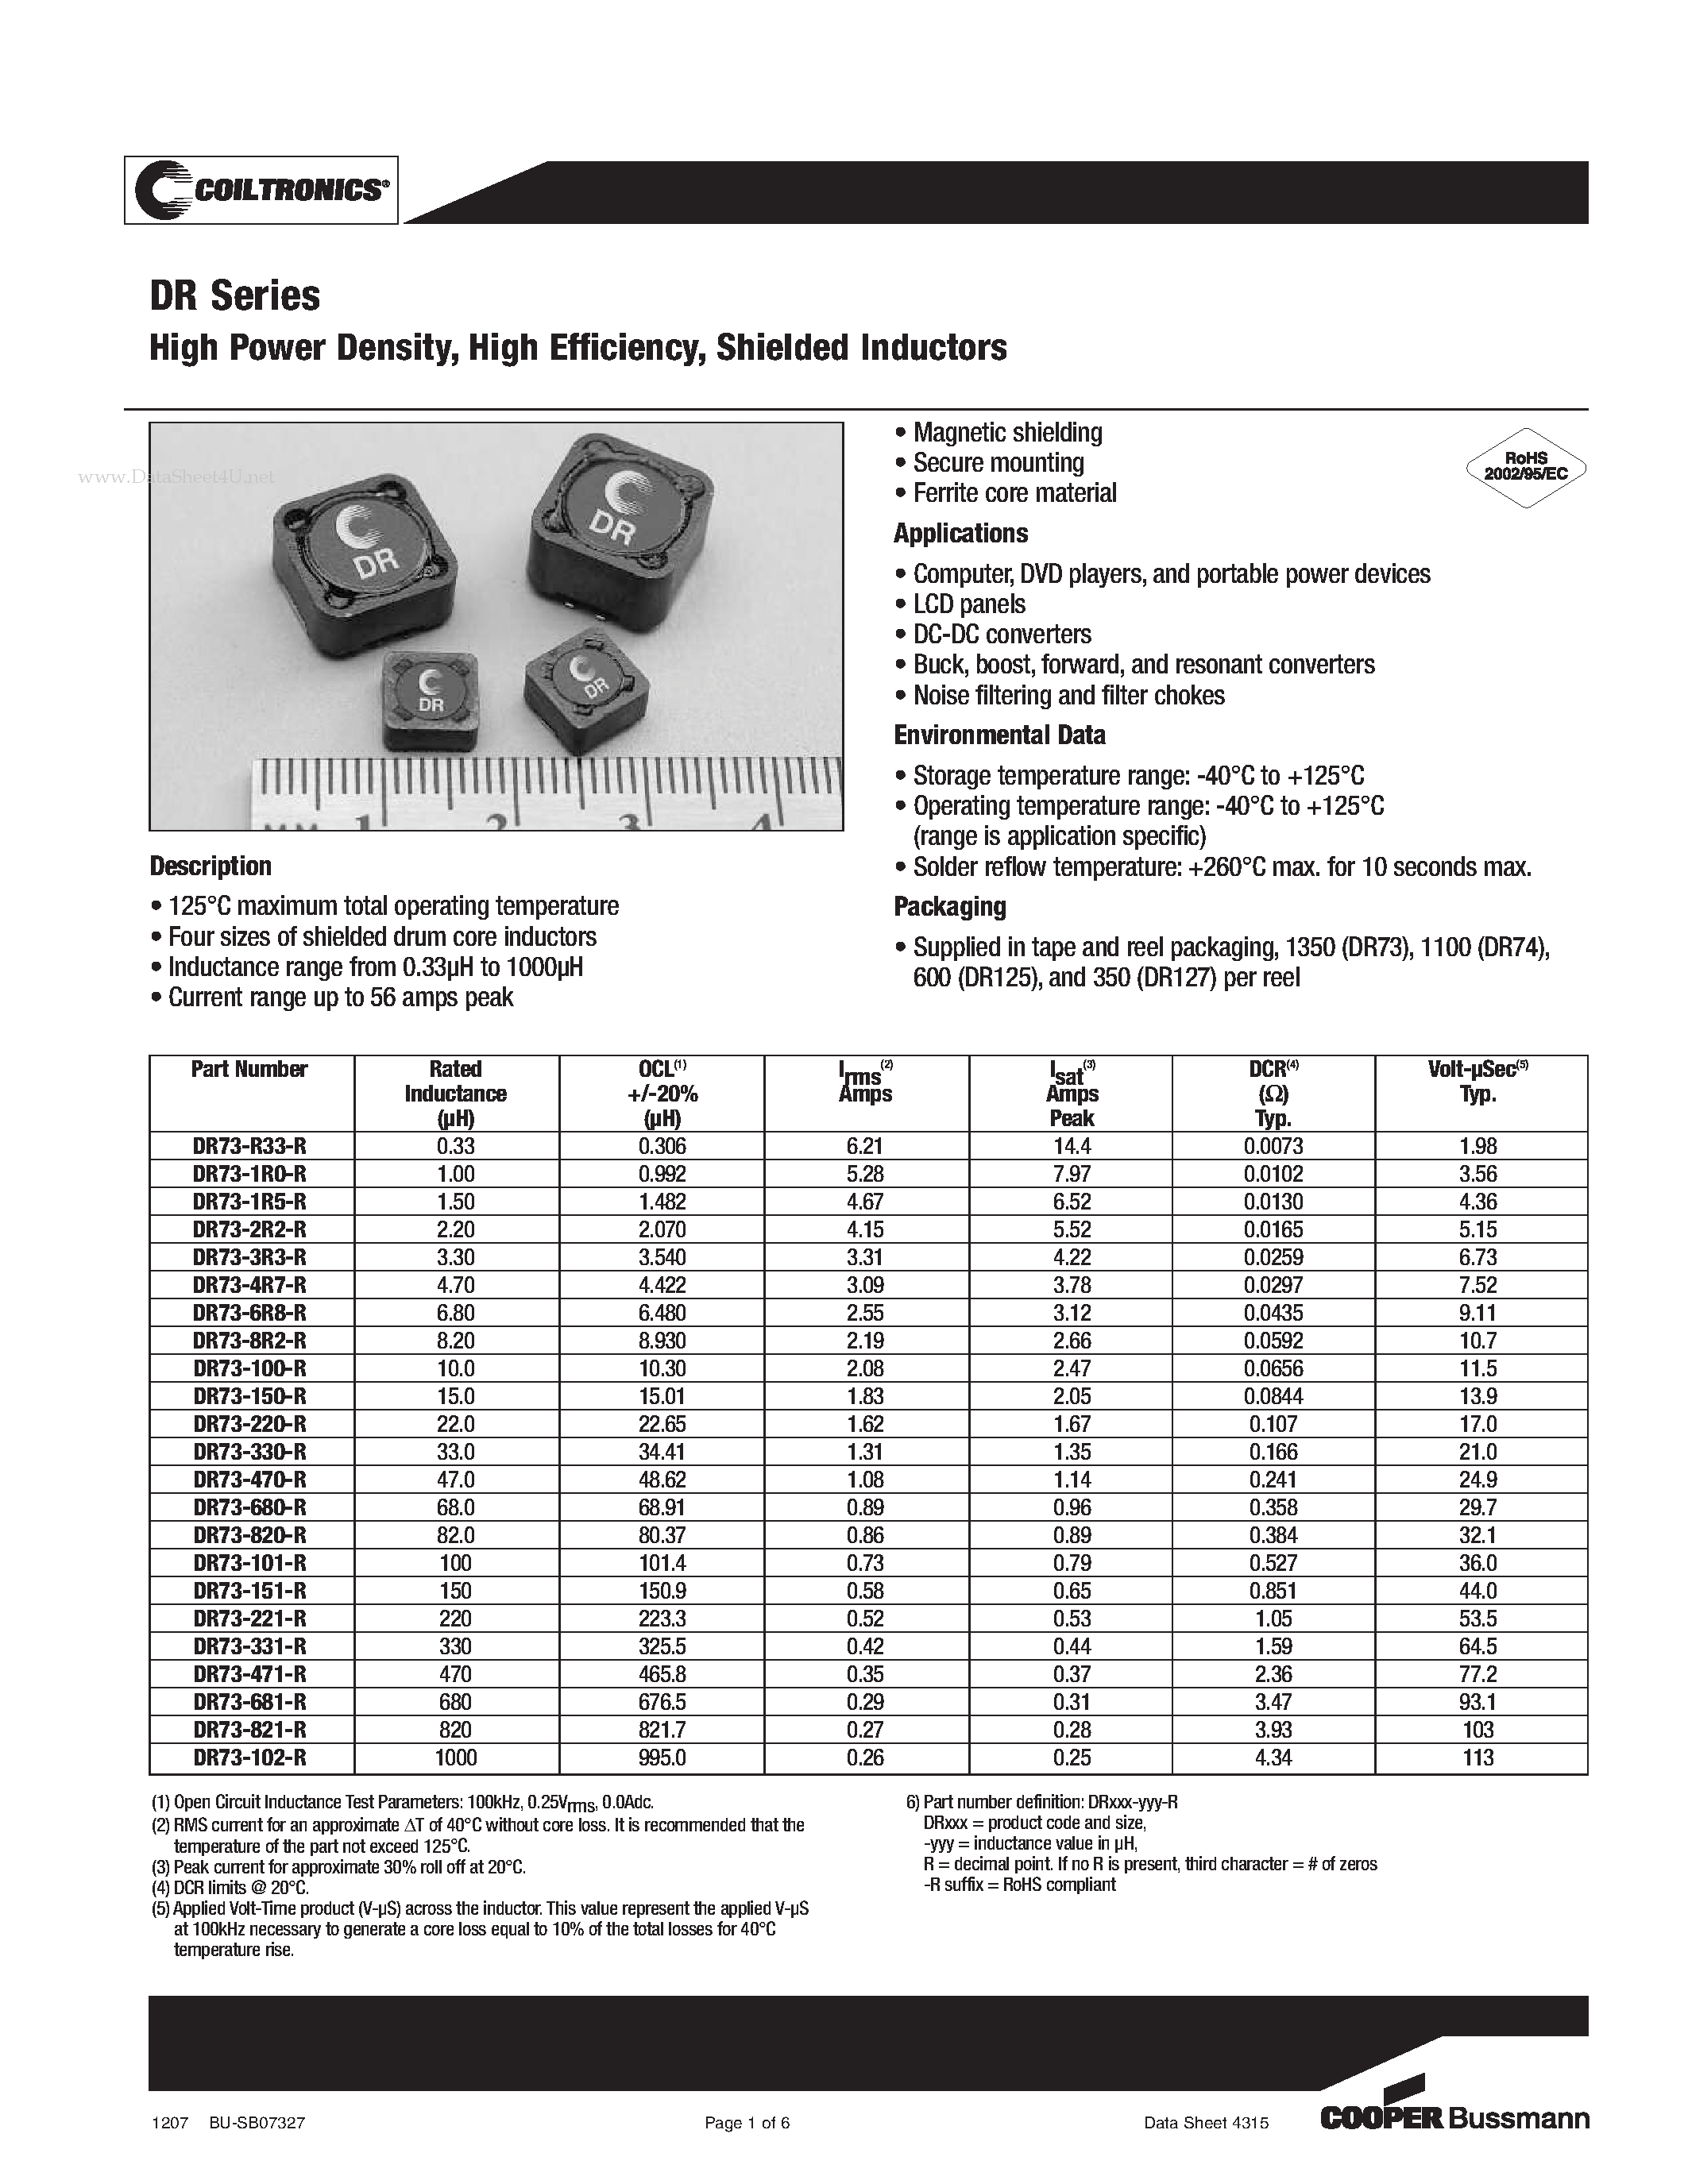 Datasheet DR125-101-R - Shielded Inductors page 1